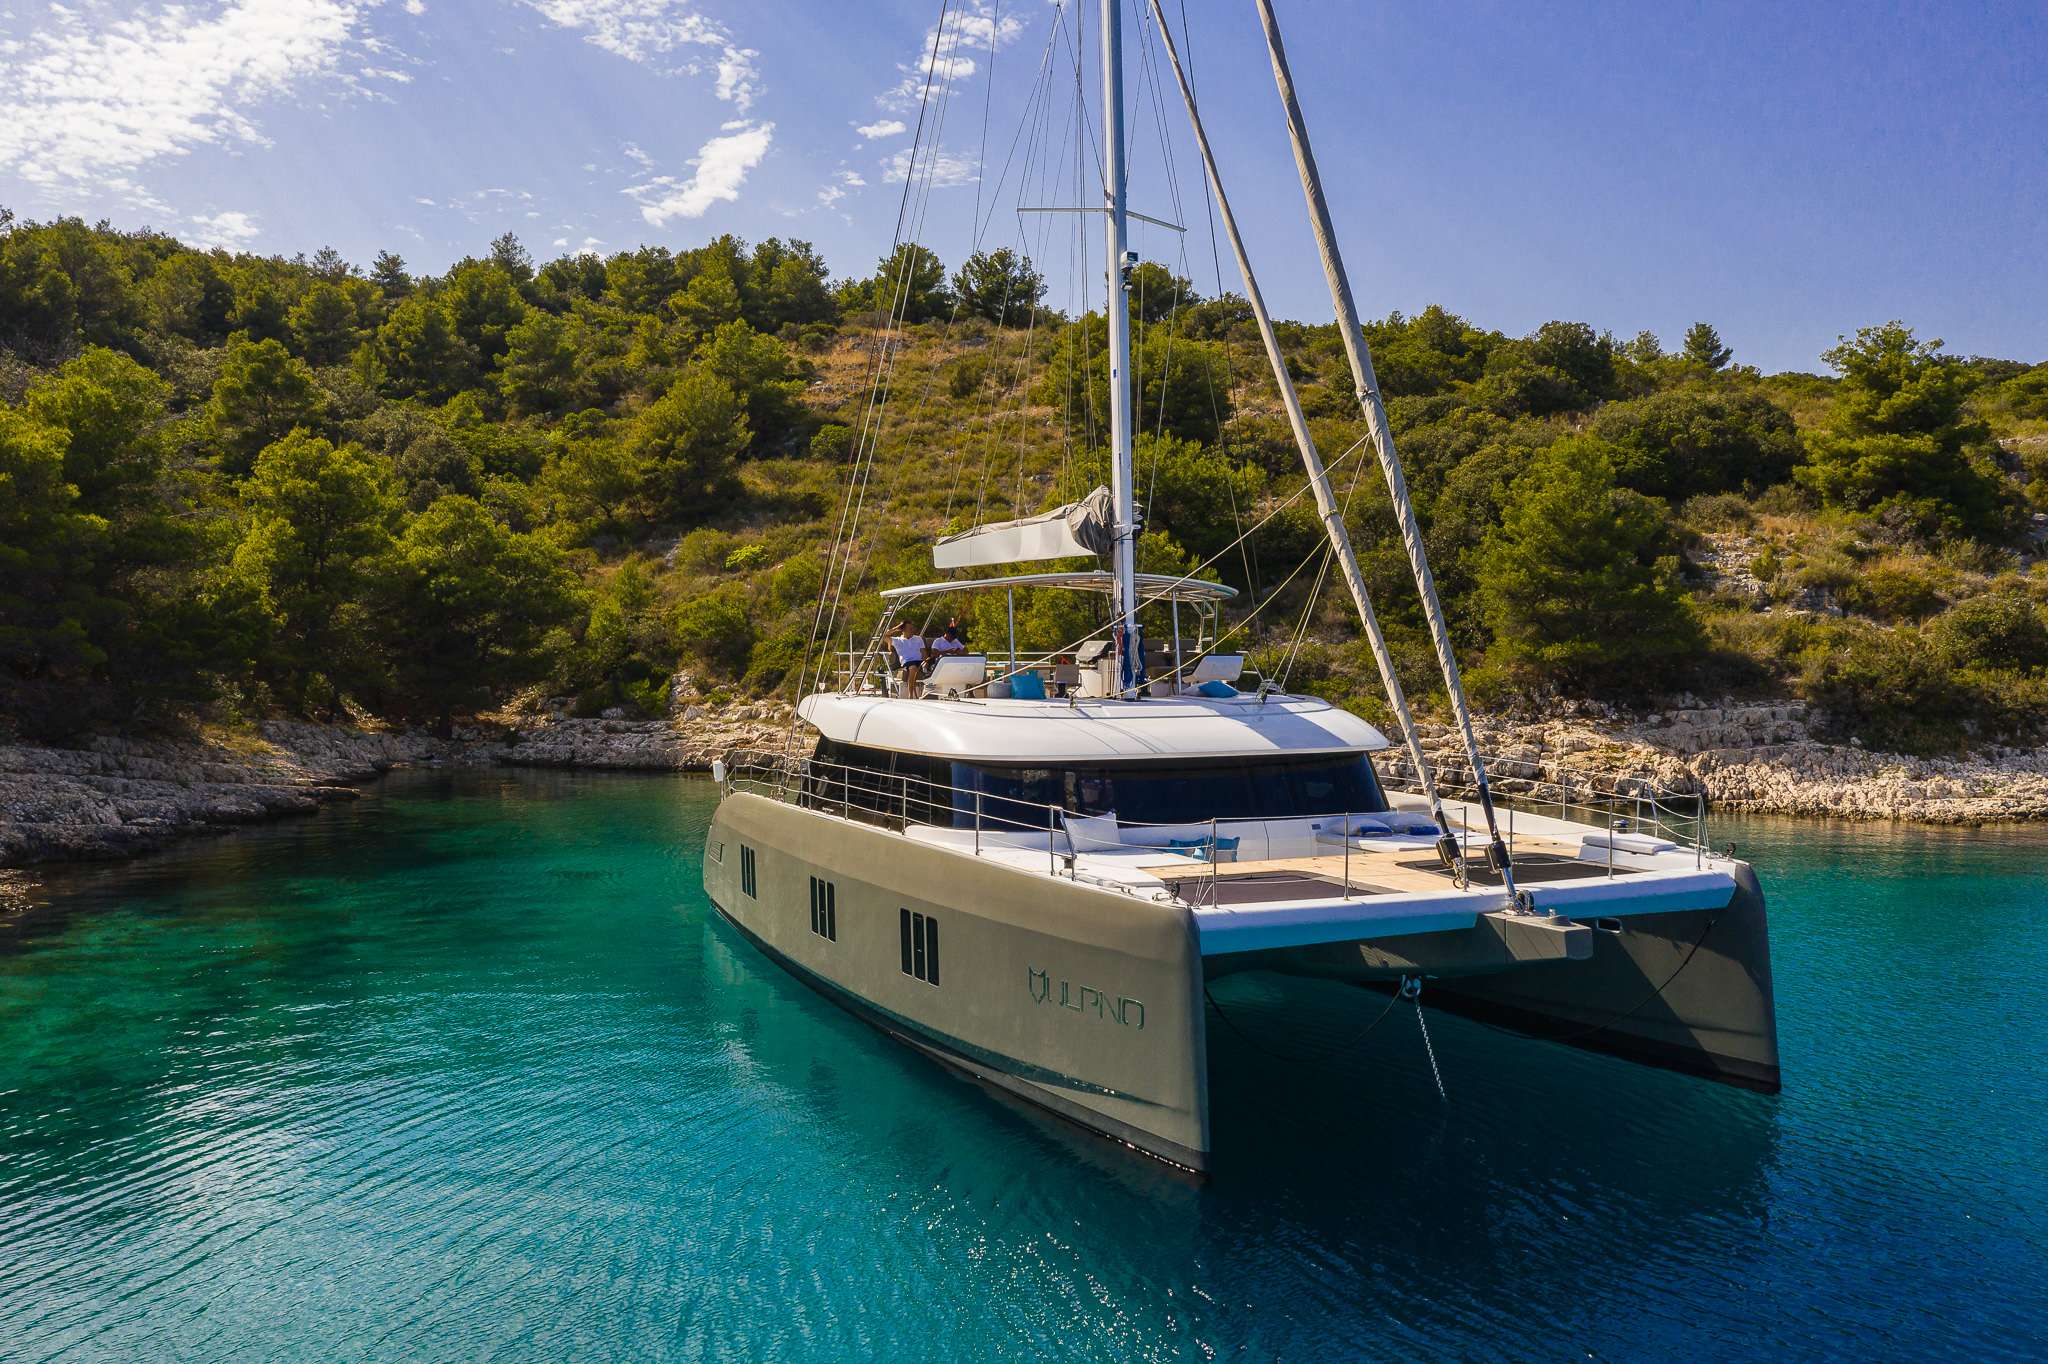 A 2020 launch, the brand new luxury sailing catamaran Sunreef 60 VULPINO has just joined the Croatia charter fleet. This stunning yacht not only features a smart and charter-friendly layout but boasts some impressive social areas at the bow, stern cockpit and flybridge. Whether you are vacationing with your family or want to reunite with your friends this spacious and powerful catamaran is hard to beat. 

Sunreef 60  VULPINO  comfortably accommodates 8 guests in the opulent master suite with a walk-in closet and 3 spacious elegant guest cabins all ensuite, with separate cabins for crew. In each cabin, there is A/C unit with individual controls, plugs, adaptors, 4 pillows, quilt and complimentary bottled water. At every bathroom, guests will find bath towels, hand towels, cosmetic tissues, hair dryer, complimentary L&rsquo;occitane toiletry. The cockpit is stocked with beach towels and complimentary sunscreen lotion. The VULPINO is available in Croatia from May 2020 from Split, and as the optional pick-up/pick off port Dubrovnik.

The crew of three (captain, chef &amp; stewardess), all trained professional with experience in their fields, will make You feel like you are on your own yacht and make sure you have the privacy but still be catered to.
